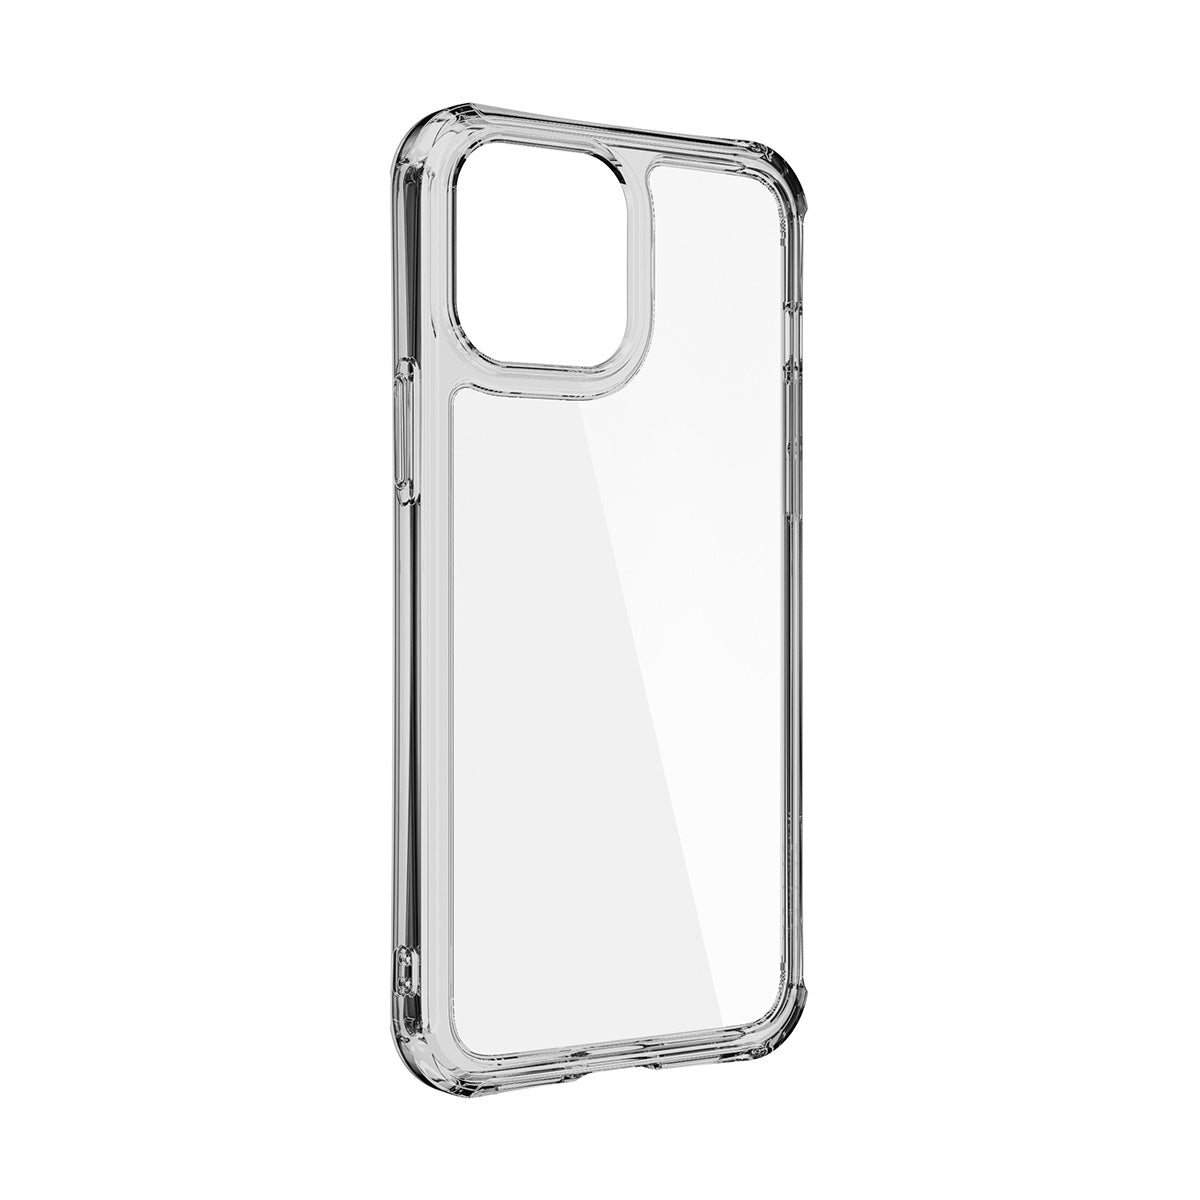 SwitchEasy ALOS Anti-microbial Shockproof Clear iPhone Case For iPhone 13 Series (Transparent)